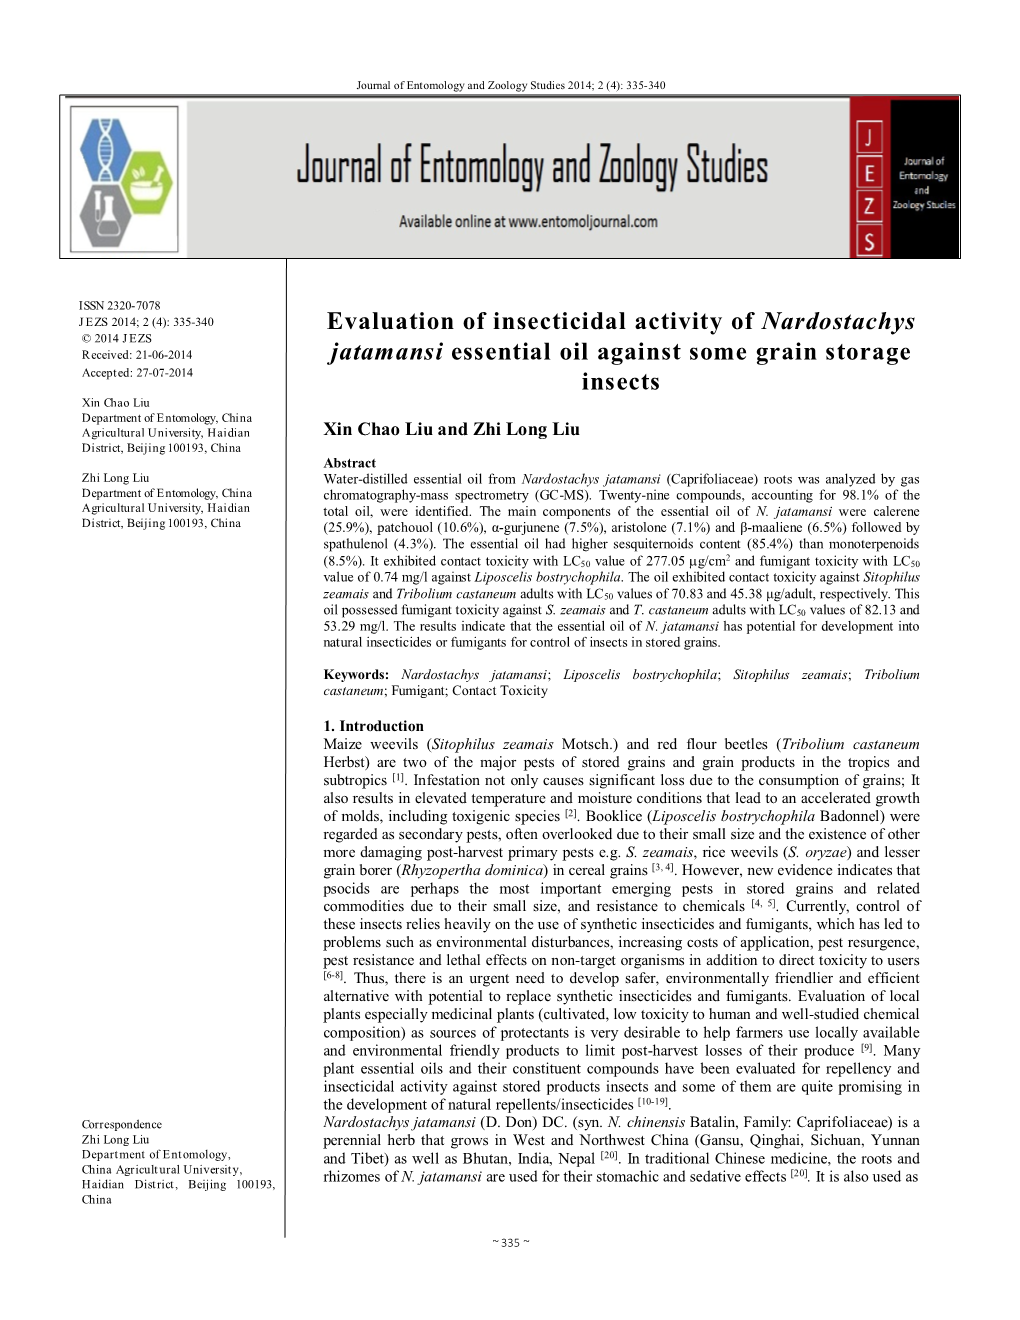 Evaluation of Insecticidal Activity of Nardostachys Jatamansi Essential Oil Against Some Grain Storage Insects